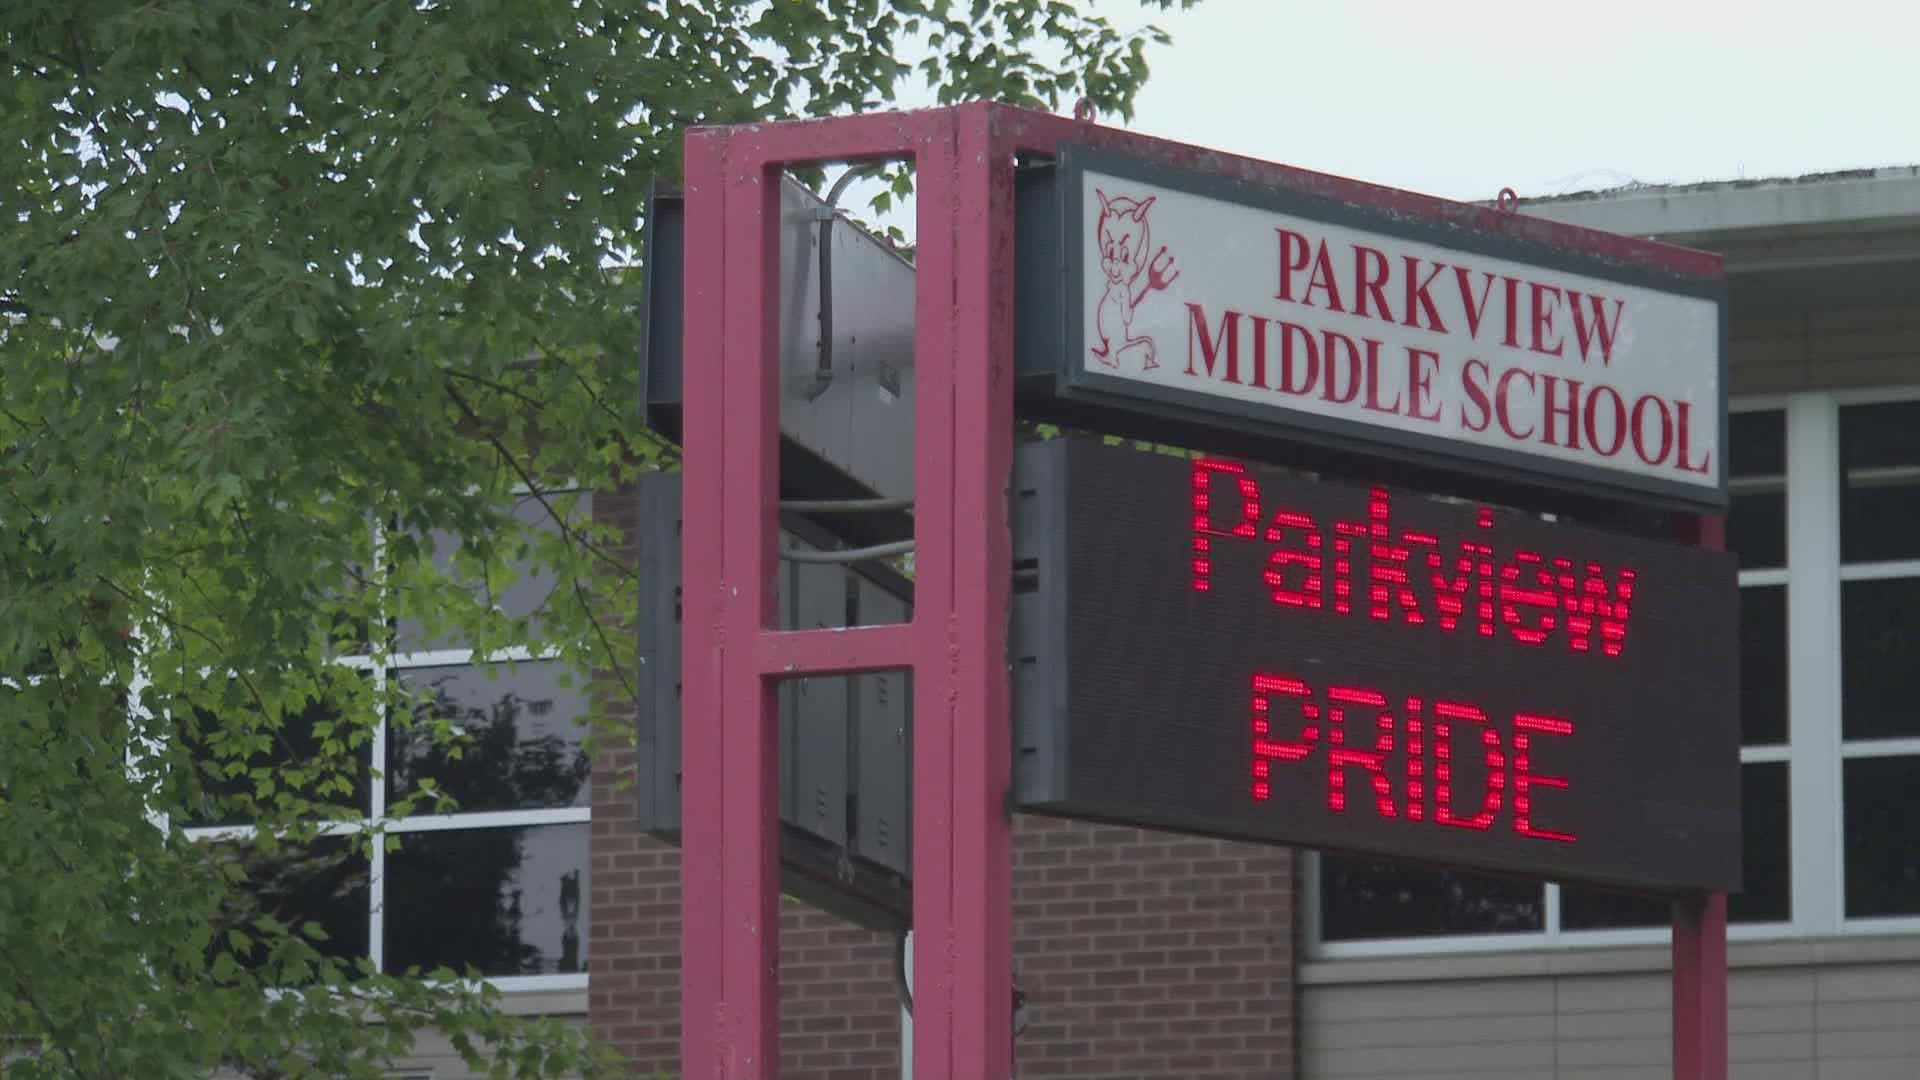 This is Greater Clark County School's second attempt to relocate the school. However, parents expressed concern about the increased drive time.